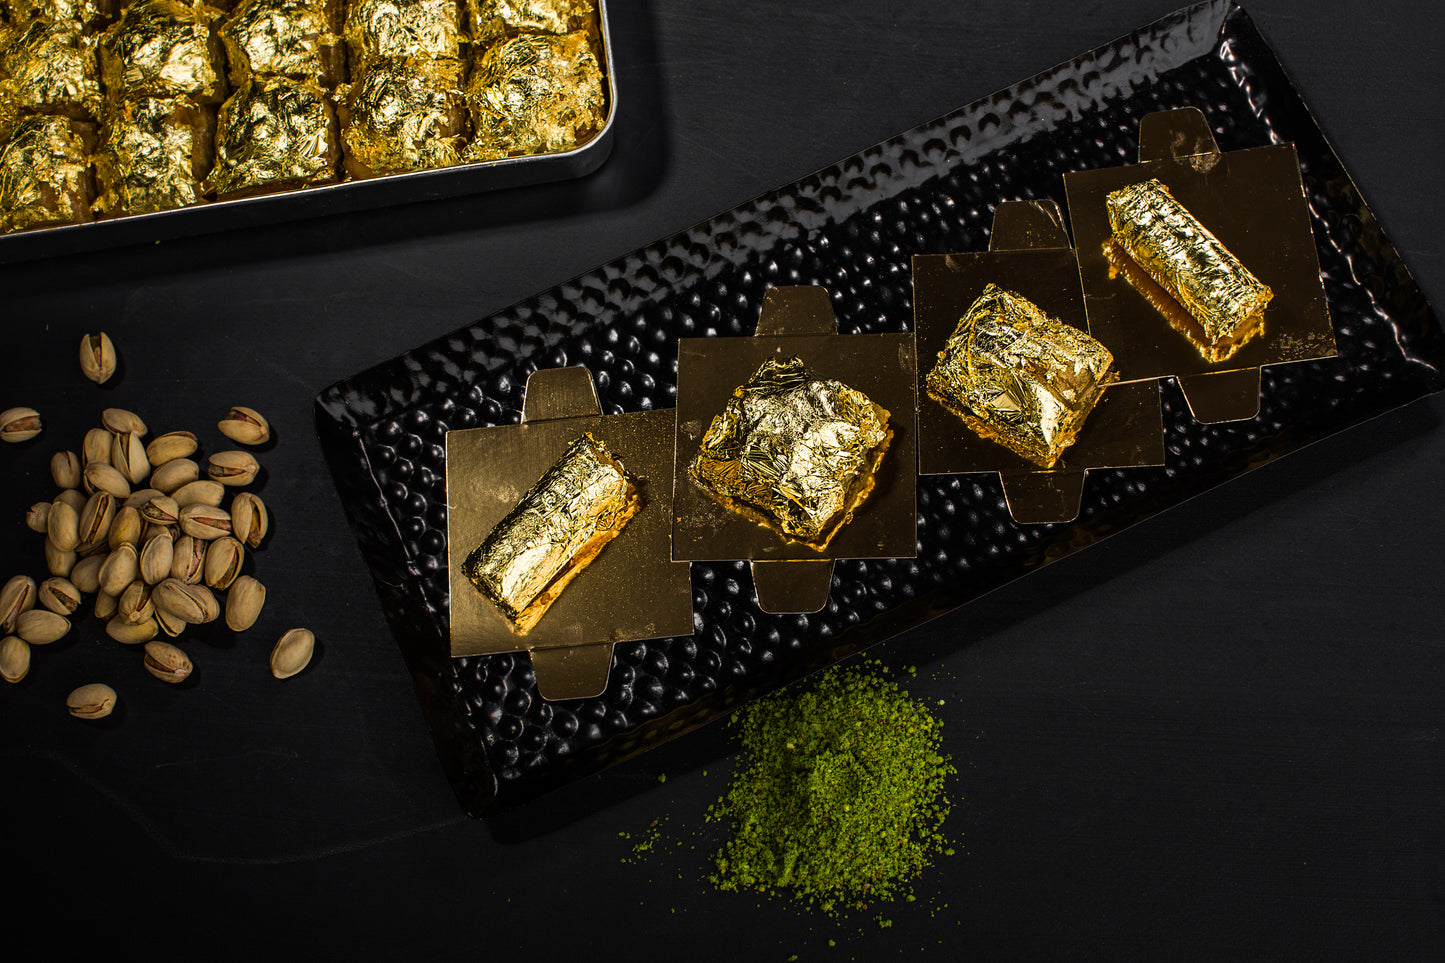 Turkish Baklava with Edible Gold Leaf